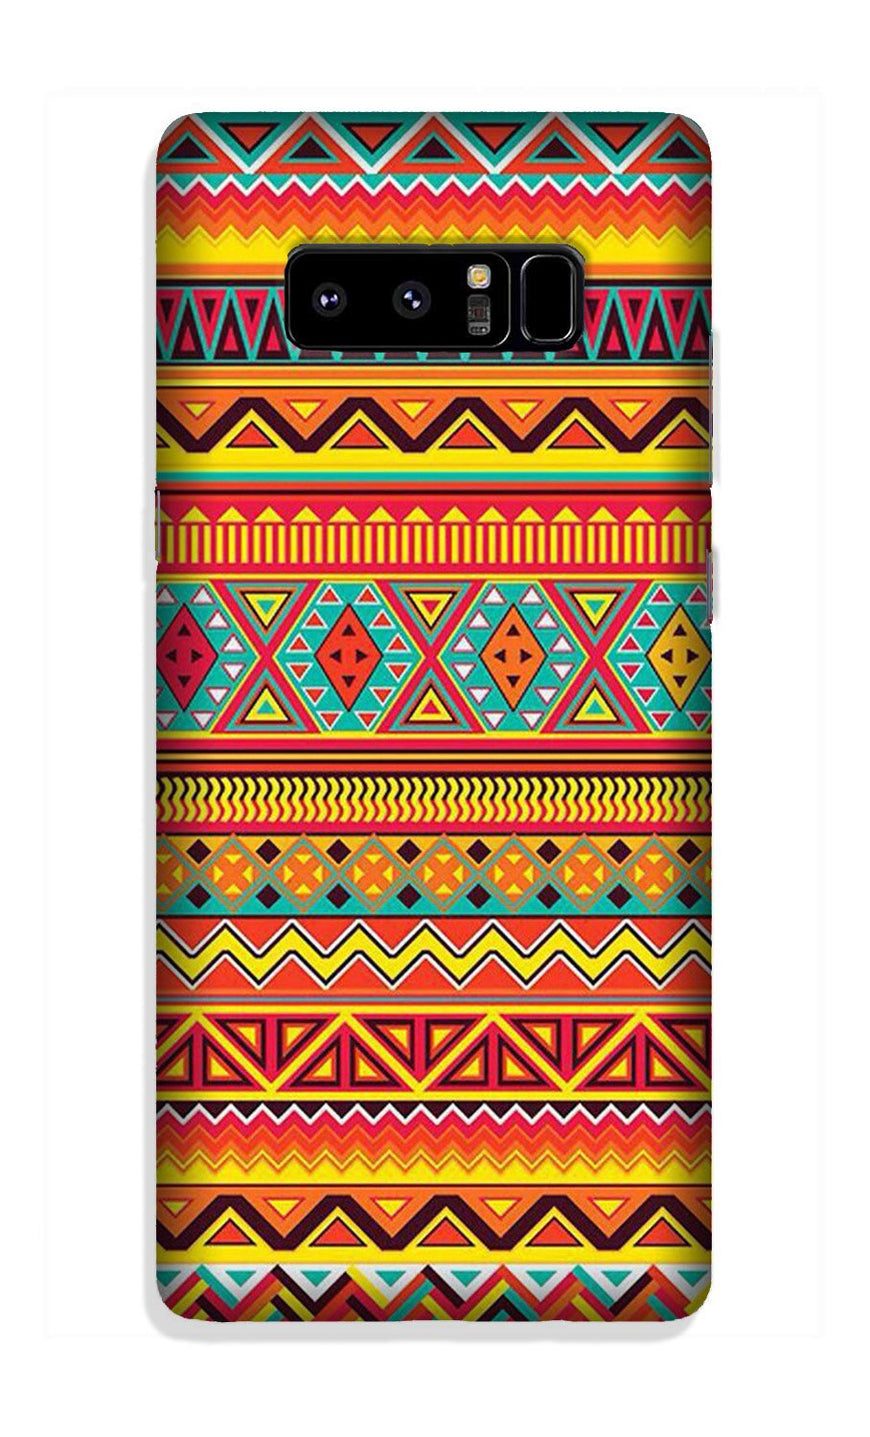 Zigzag line pattern Case for Galaxy Note 8